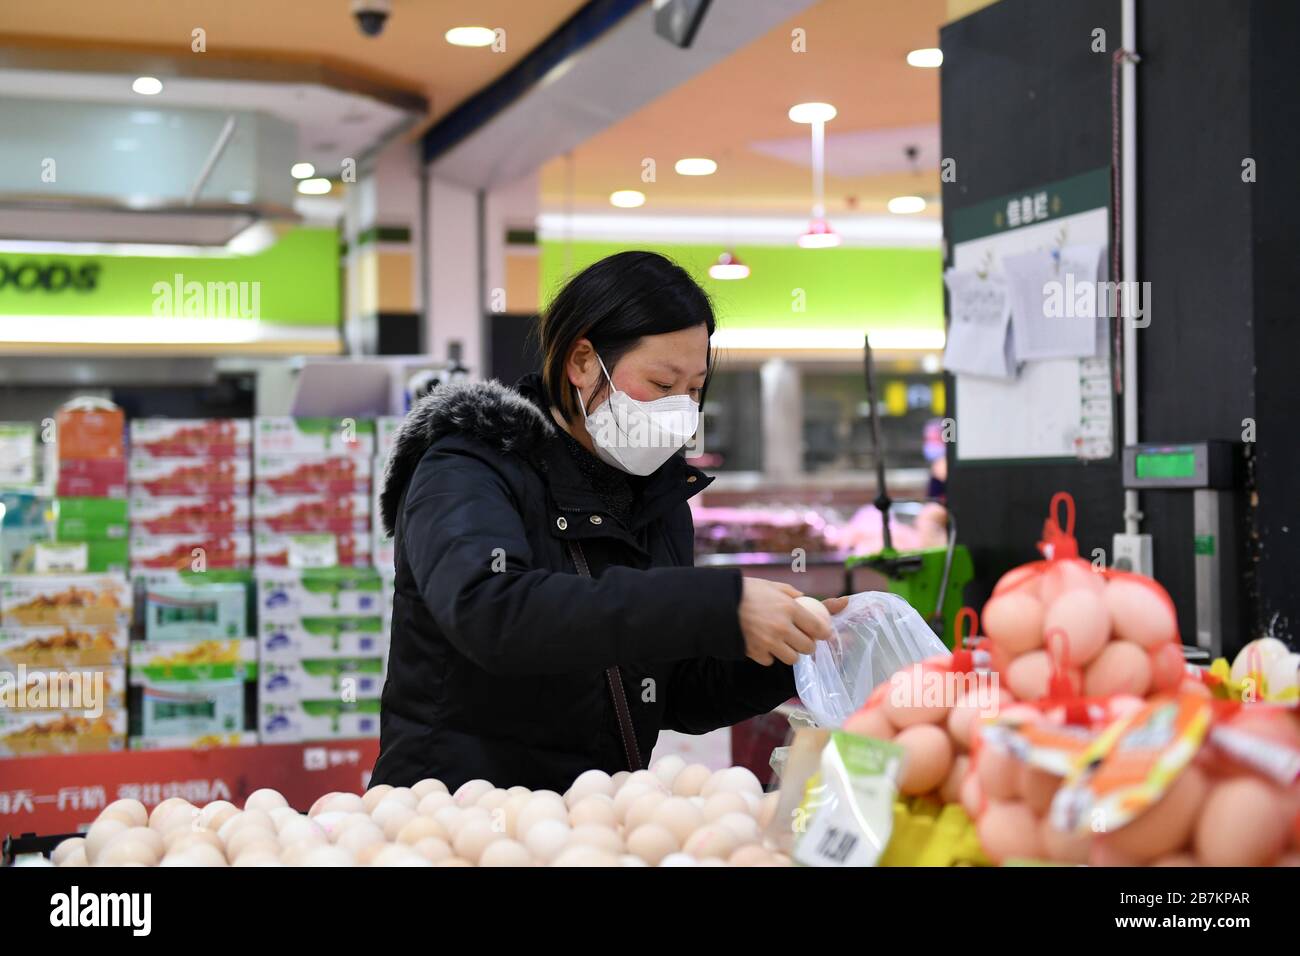 A person shops for eggs in a supermarket in Huairen city, northwest China's Guizhou province, 23 February 2020. Stock Photo